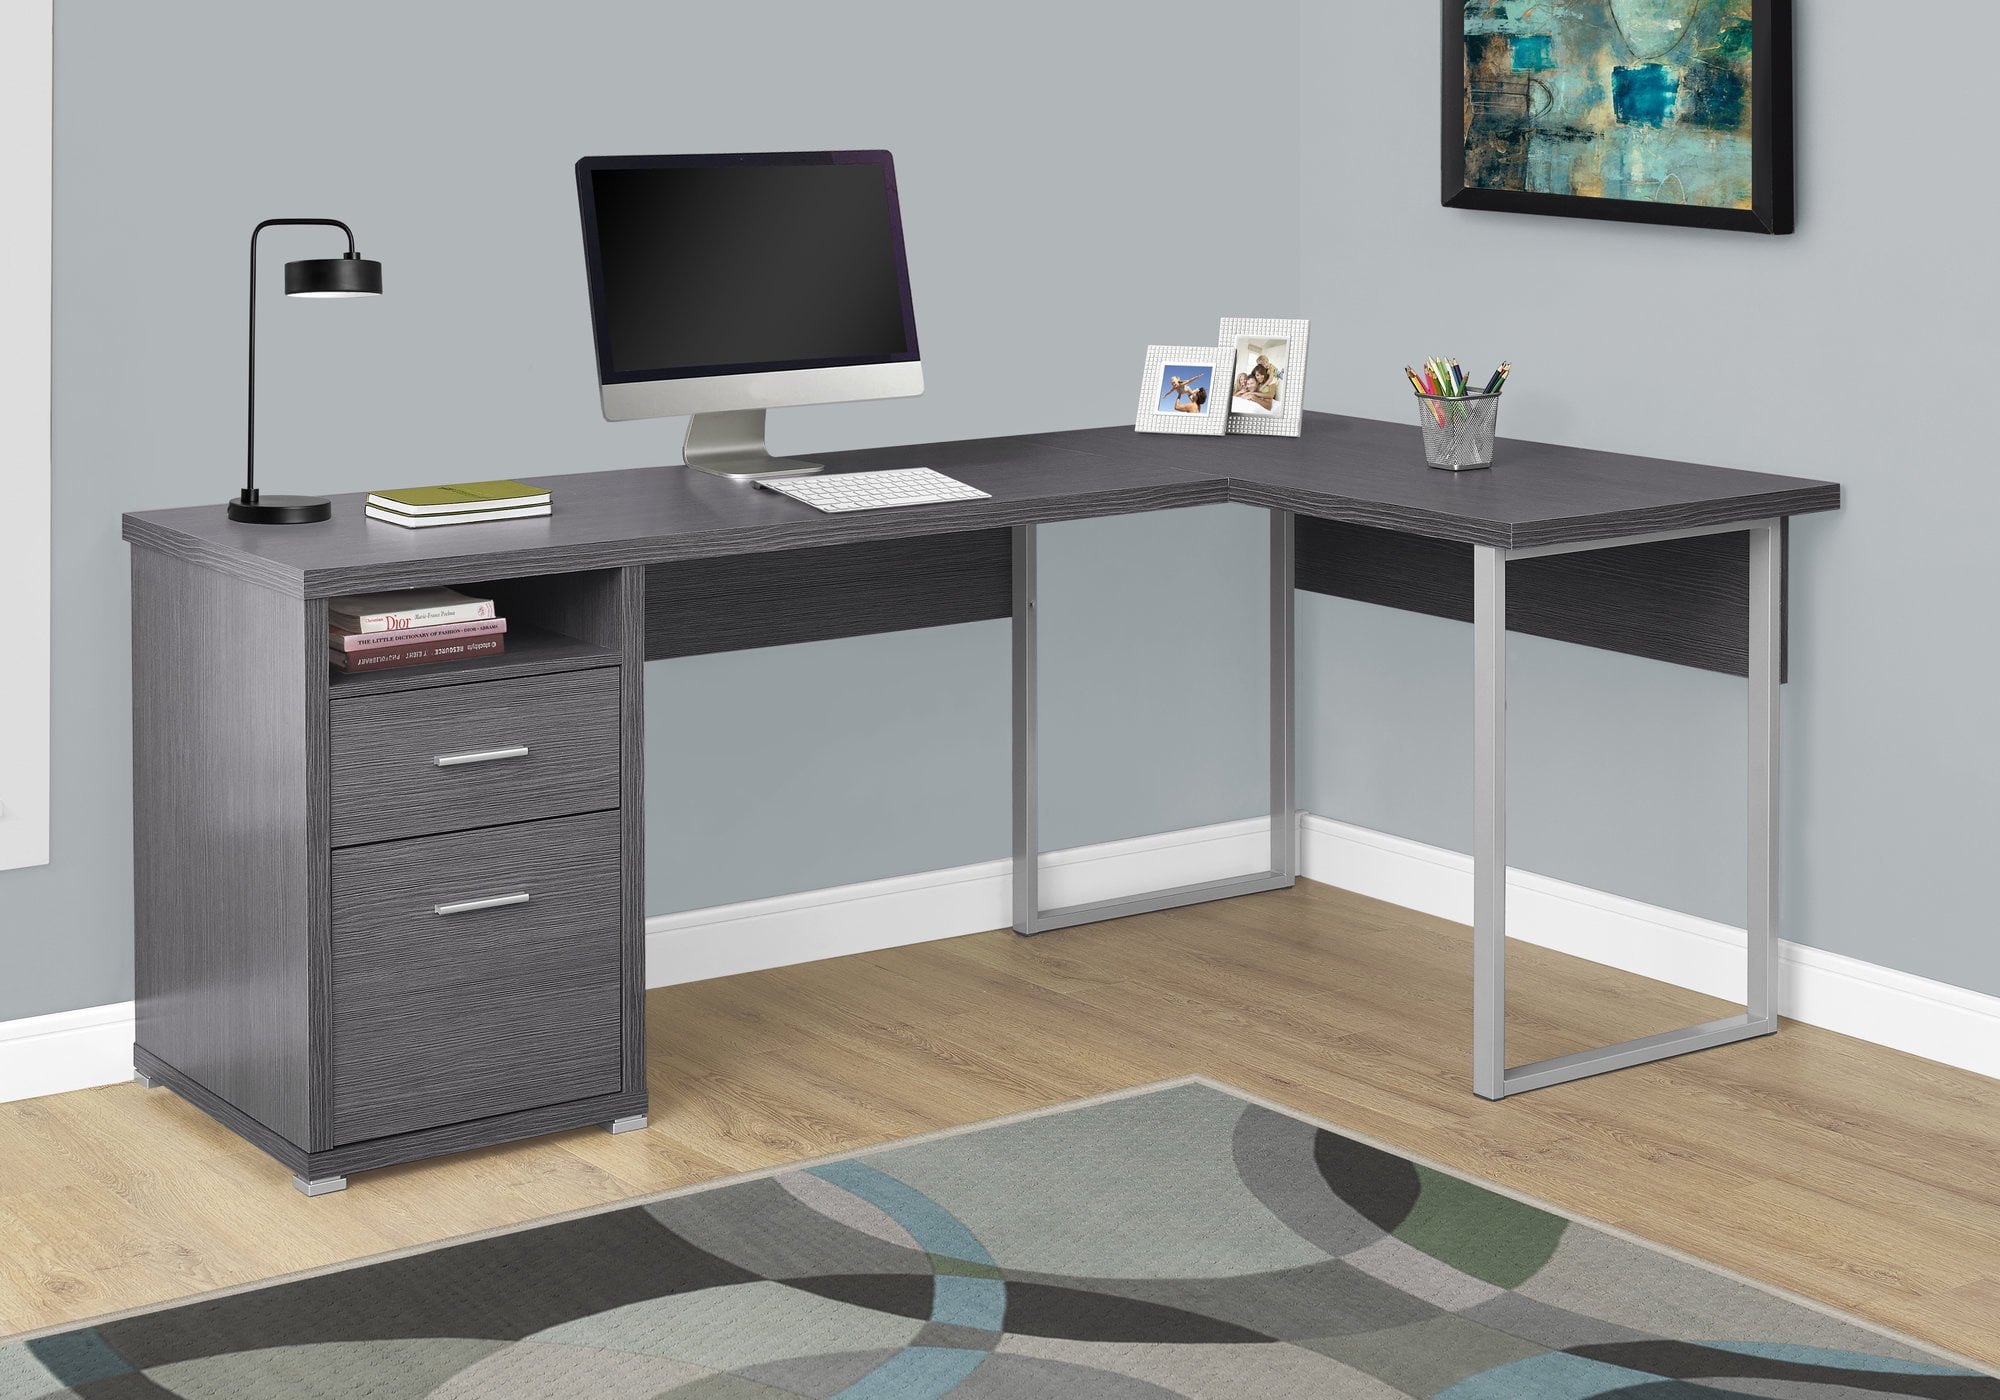 63 Modern Black Home Office Desk with Drawers & Side Cabinet in Gold Base